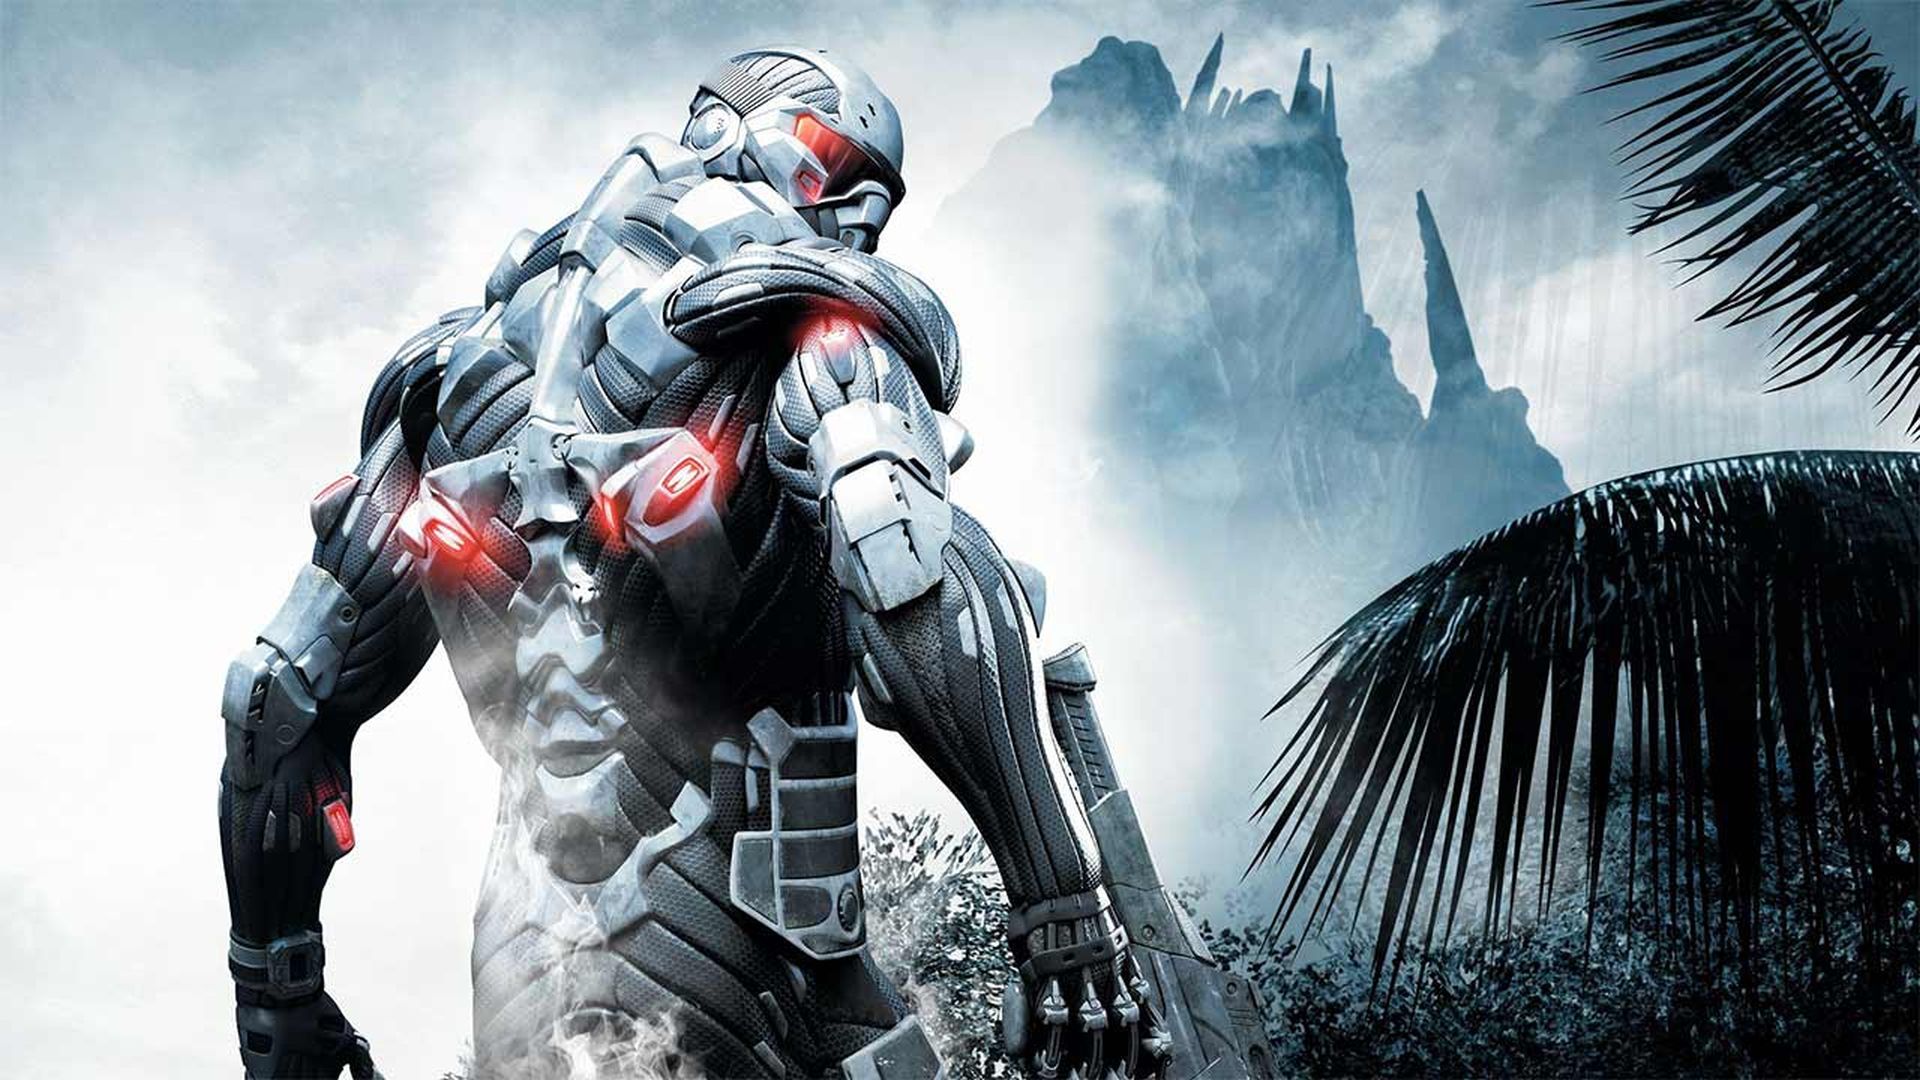 Crysis Remastered Pc Requirements Revealed